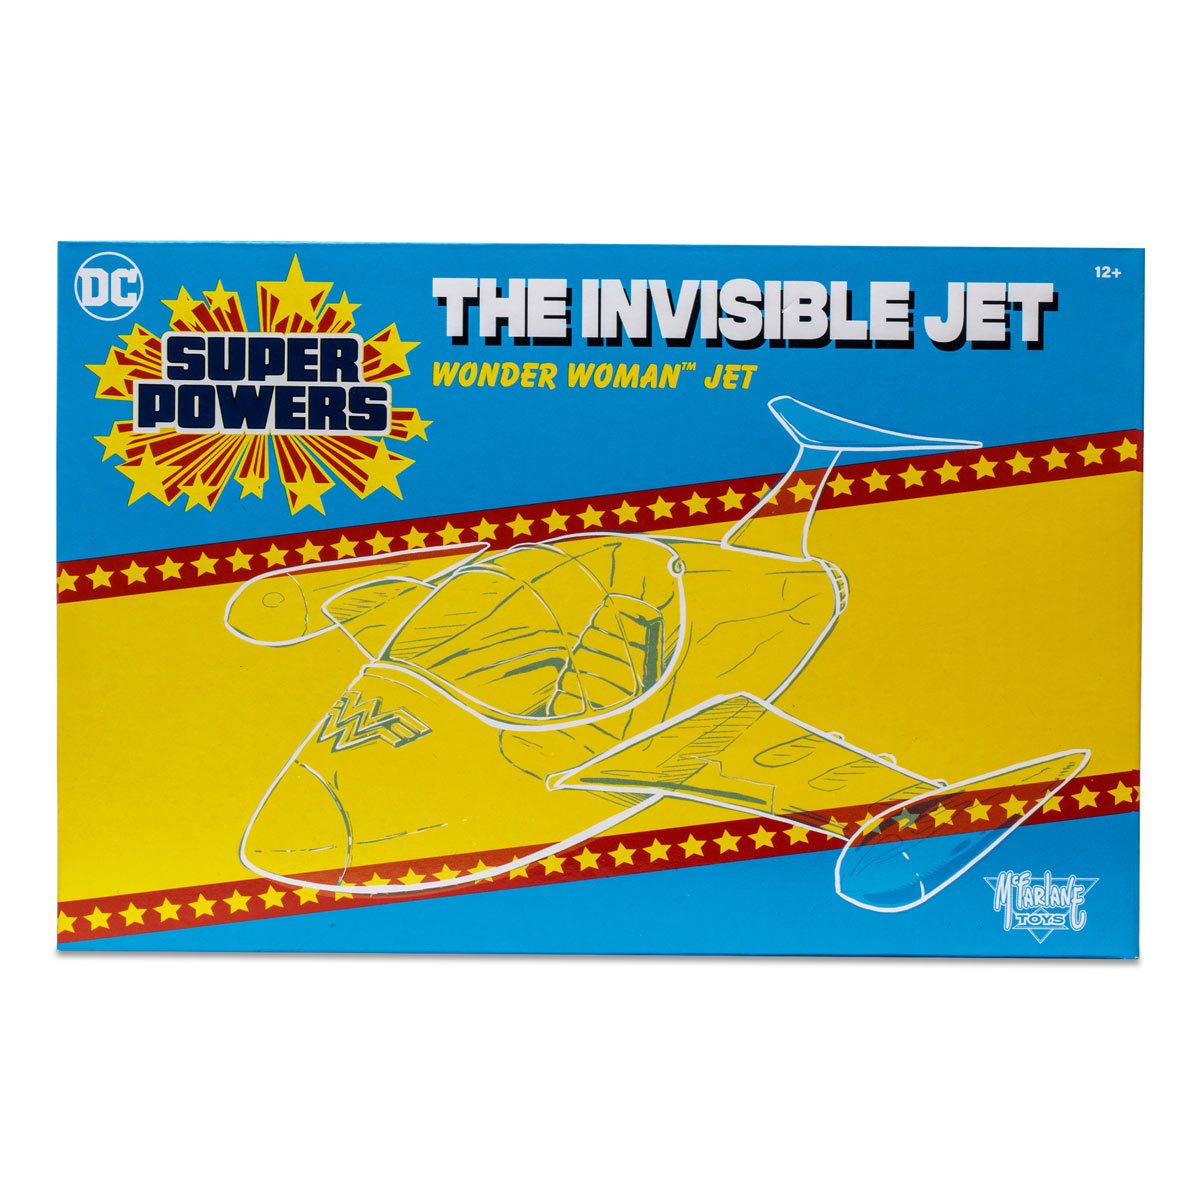 DC Super Powers The Invisible Jet Vehicle